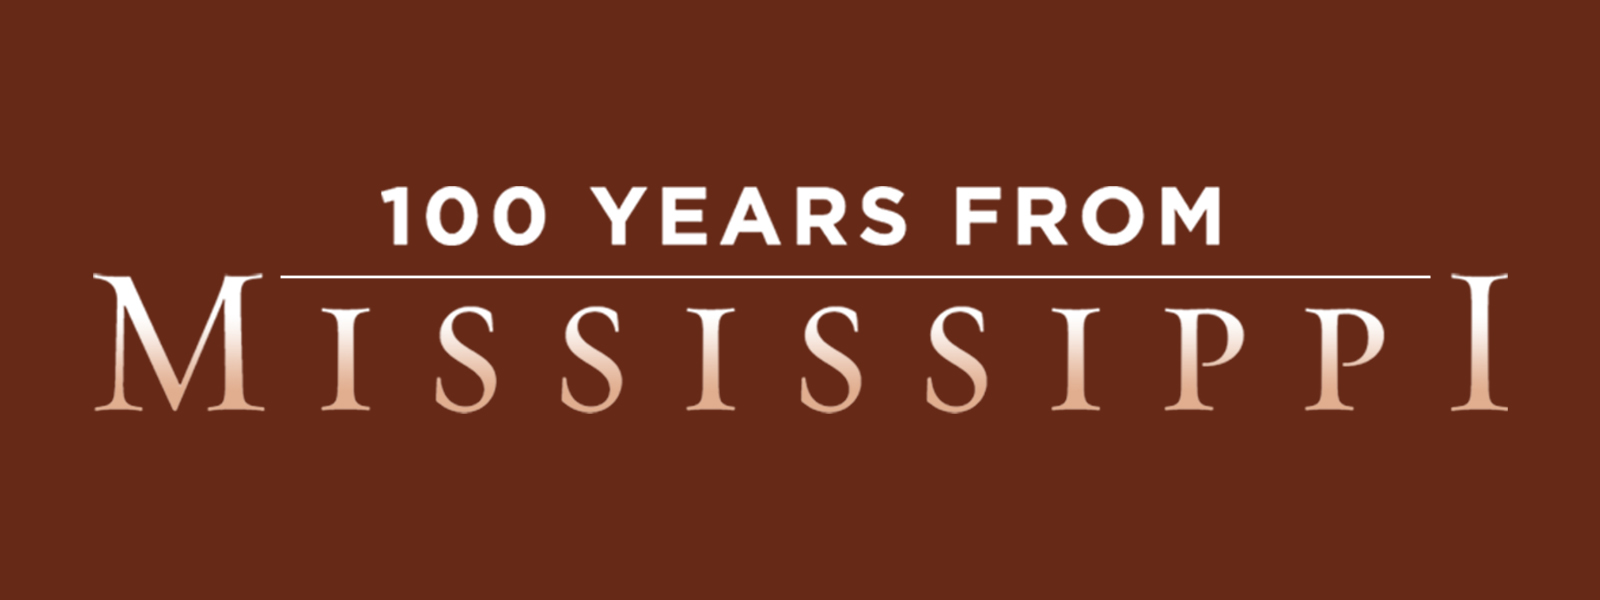 100 years from mississippi